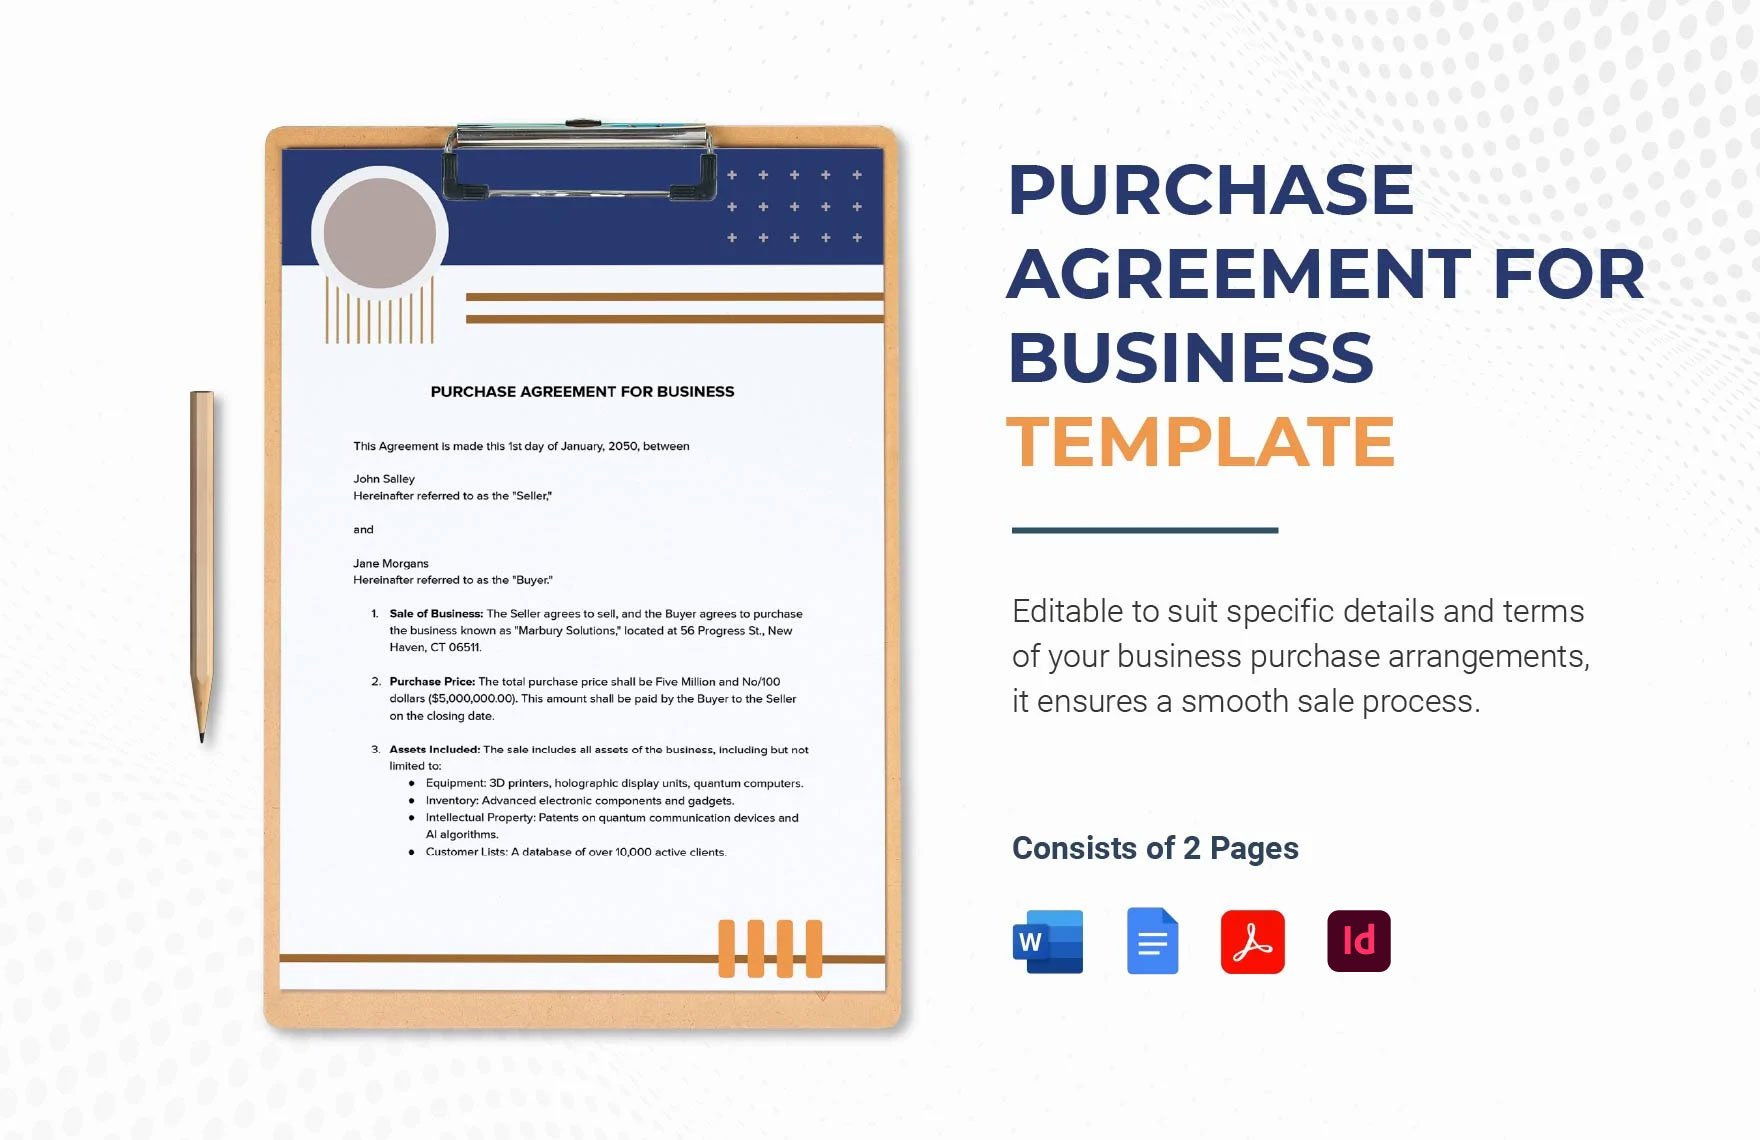 Purchase Agreement for Business Template